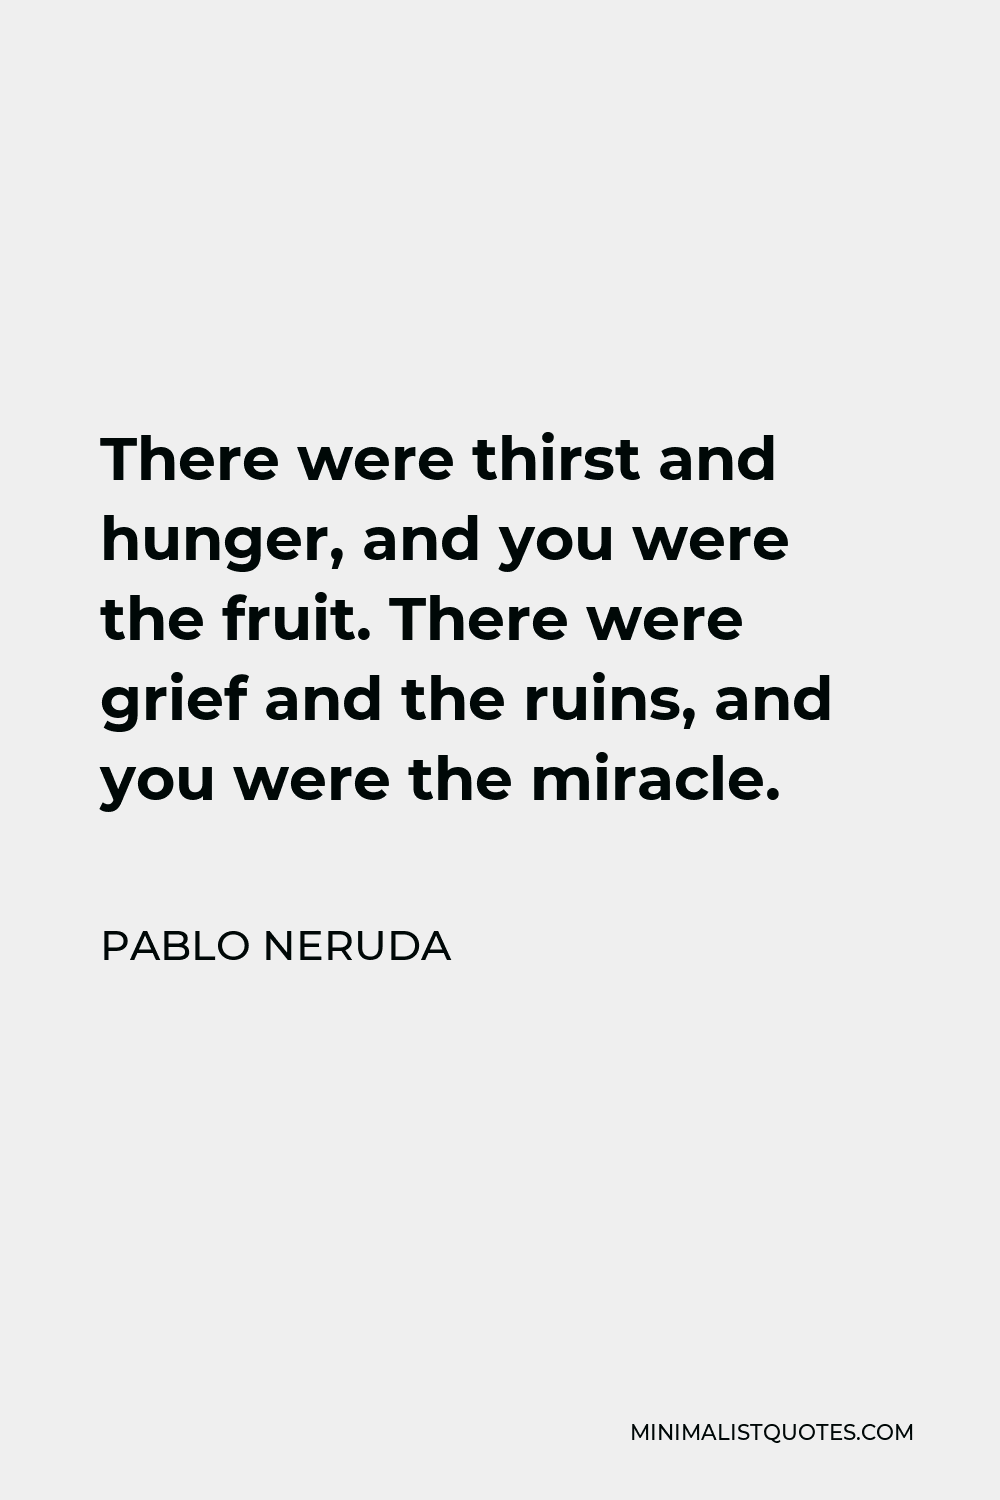 Pablo Neruda Quote - There were thirst and hunger, and you were the fruit. There were grief and the ruins, and you were the miracle.